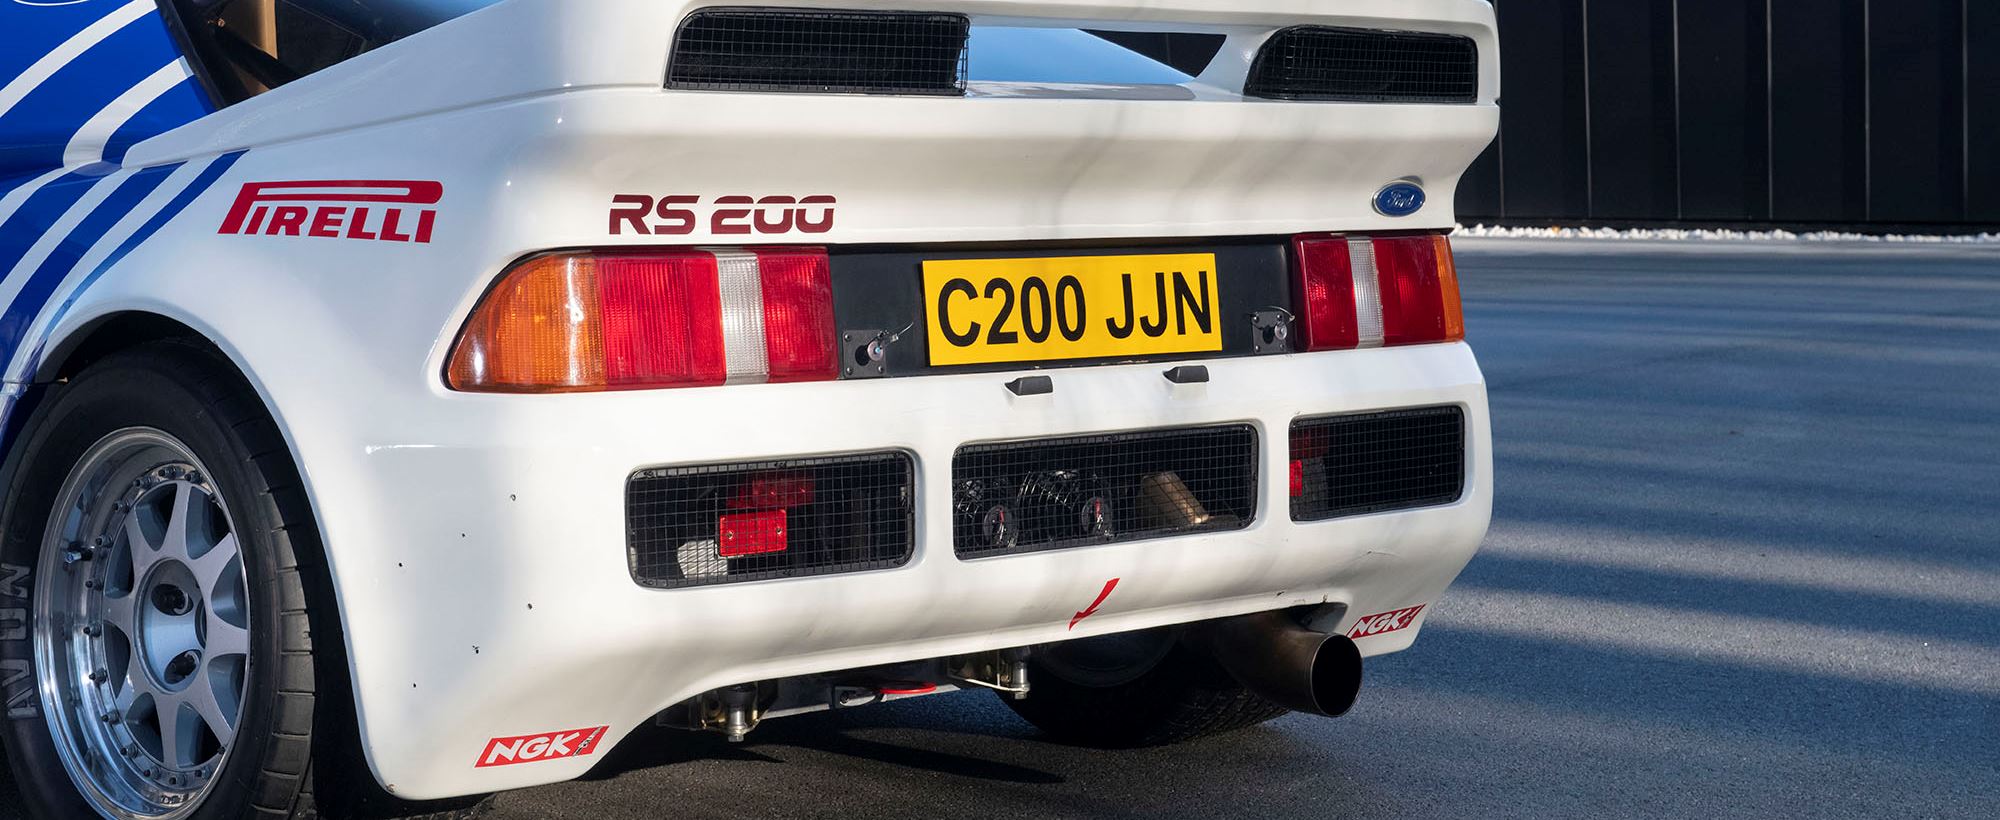 Ford RS 200 008.jpg